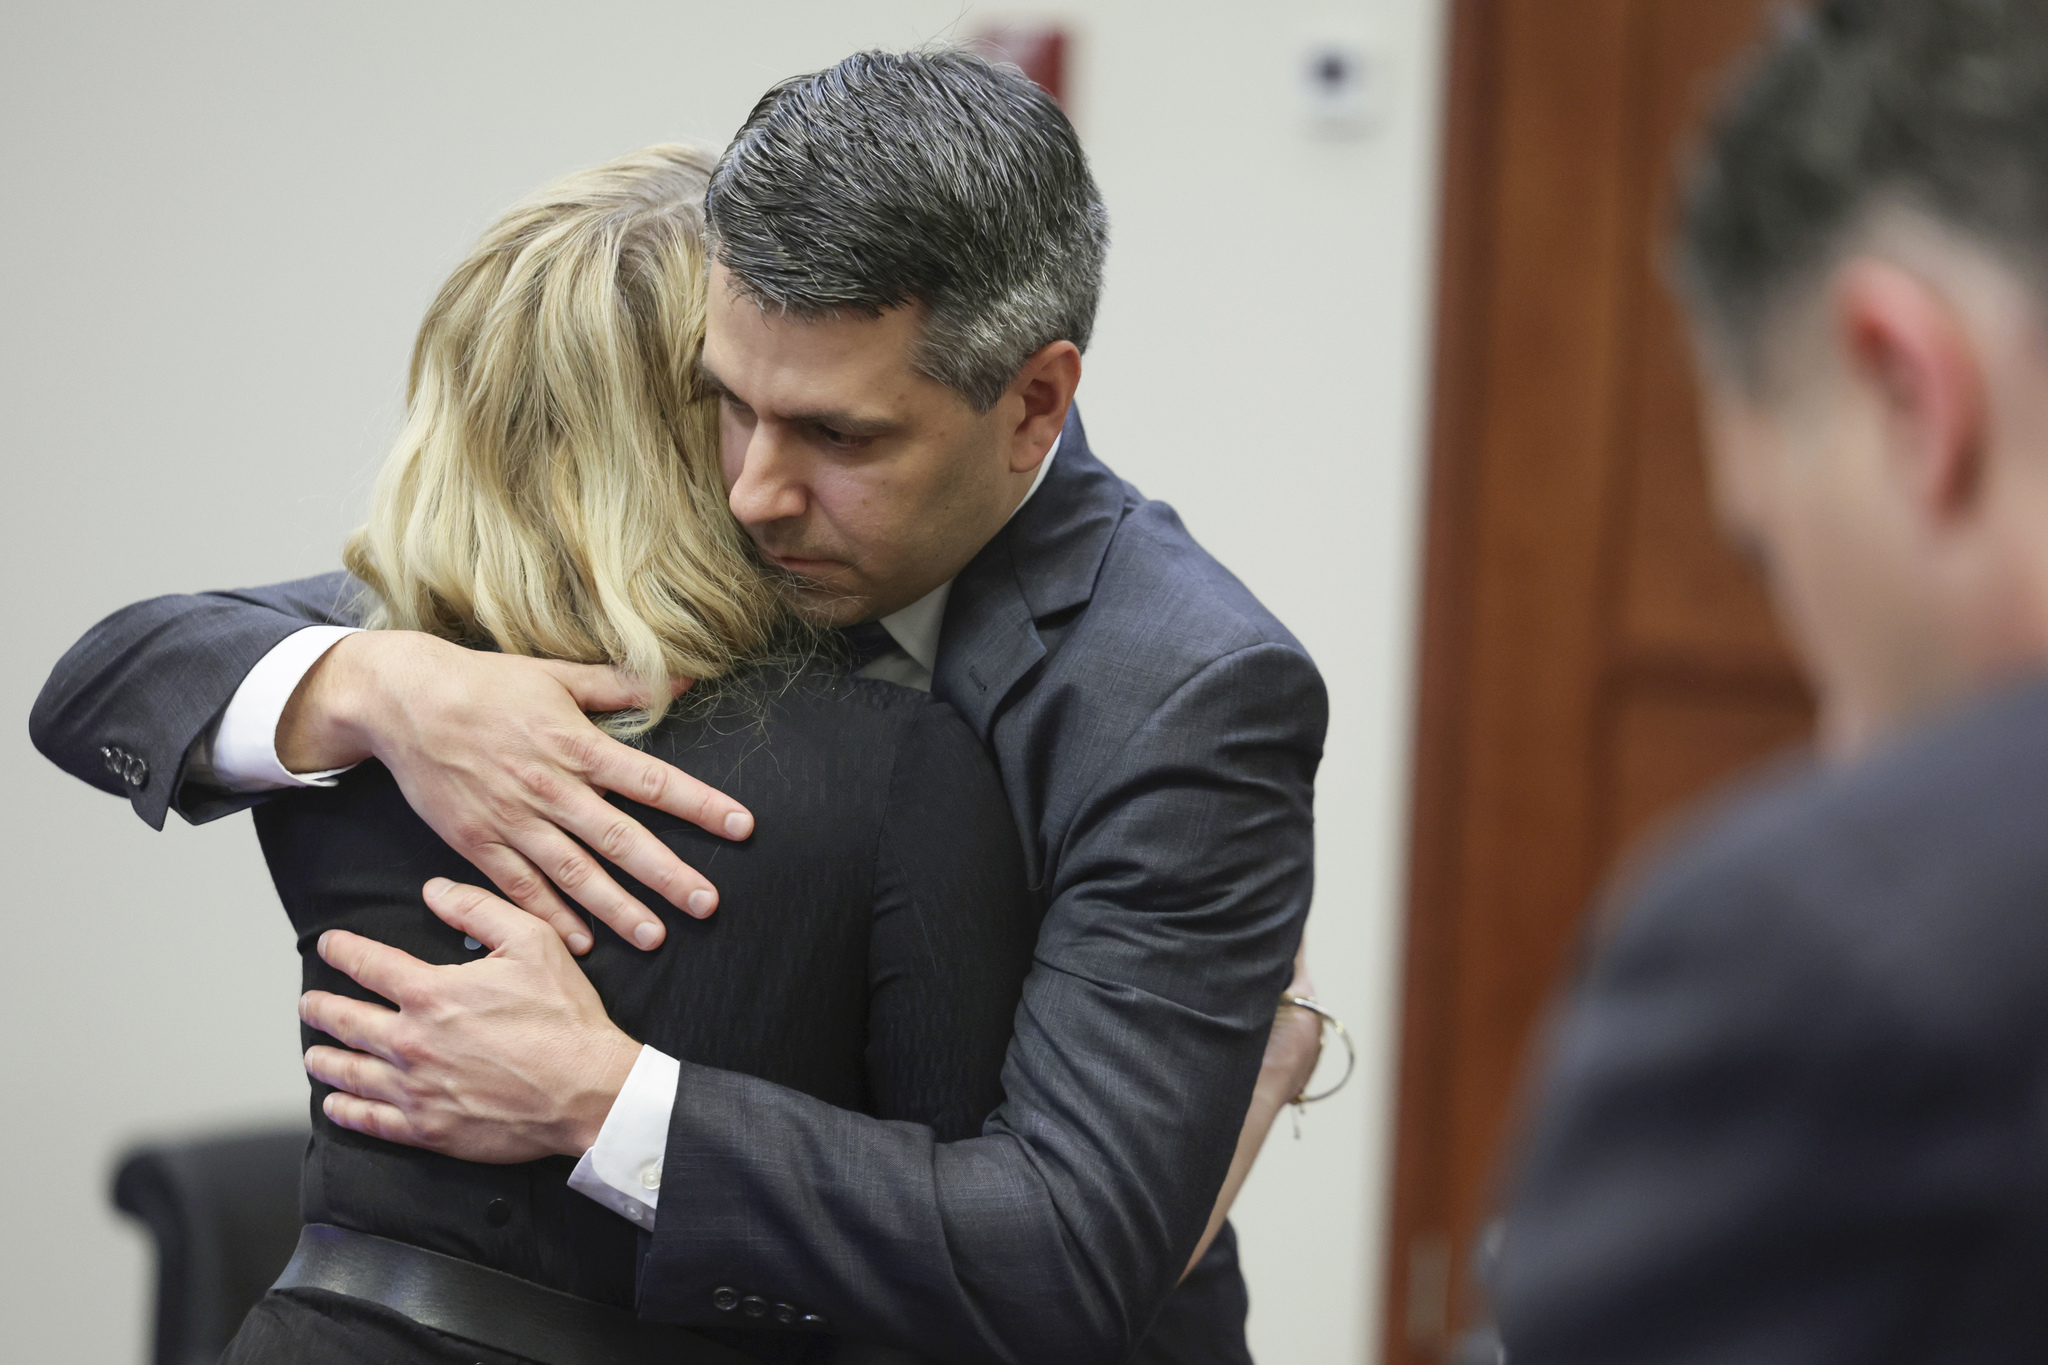 Actor Amber Heard hugs her attorney Benjamin Rottenborn after the verdict was read at the Fairfax County Circuit Courthouse in Fairfax, Va, Wednesday, June 1, 2022. The jury awarded Johnny  lt;HIT gt;Depp lt;/HIT gt; more than $10 million in his libel lawsuit against ex-wife Amber Heard. It vindicates his stance that Heard fabricated claims that she was abused by  lt;HIT gt;Depp lt;/HIT gt; before and during their brief marriage. But the jury also found in favor of Heard, who said she was defamed by a lawyer for  lt;HIT gt;Depp lt;/HIT gt;.(Evelyn Hockstein/Pool via AP)